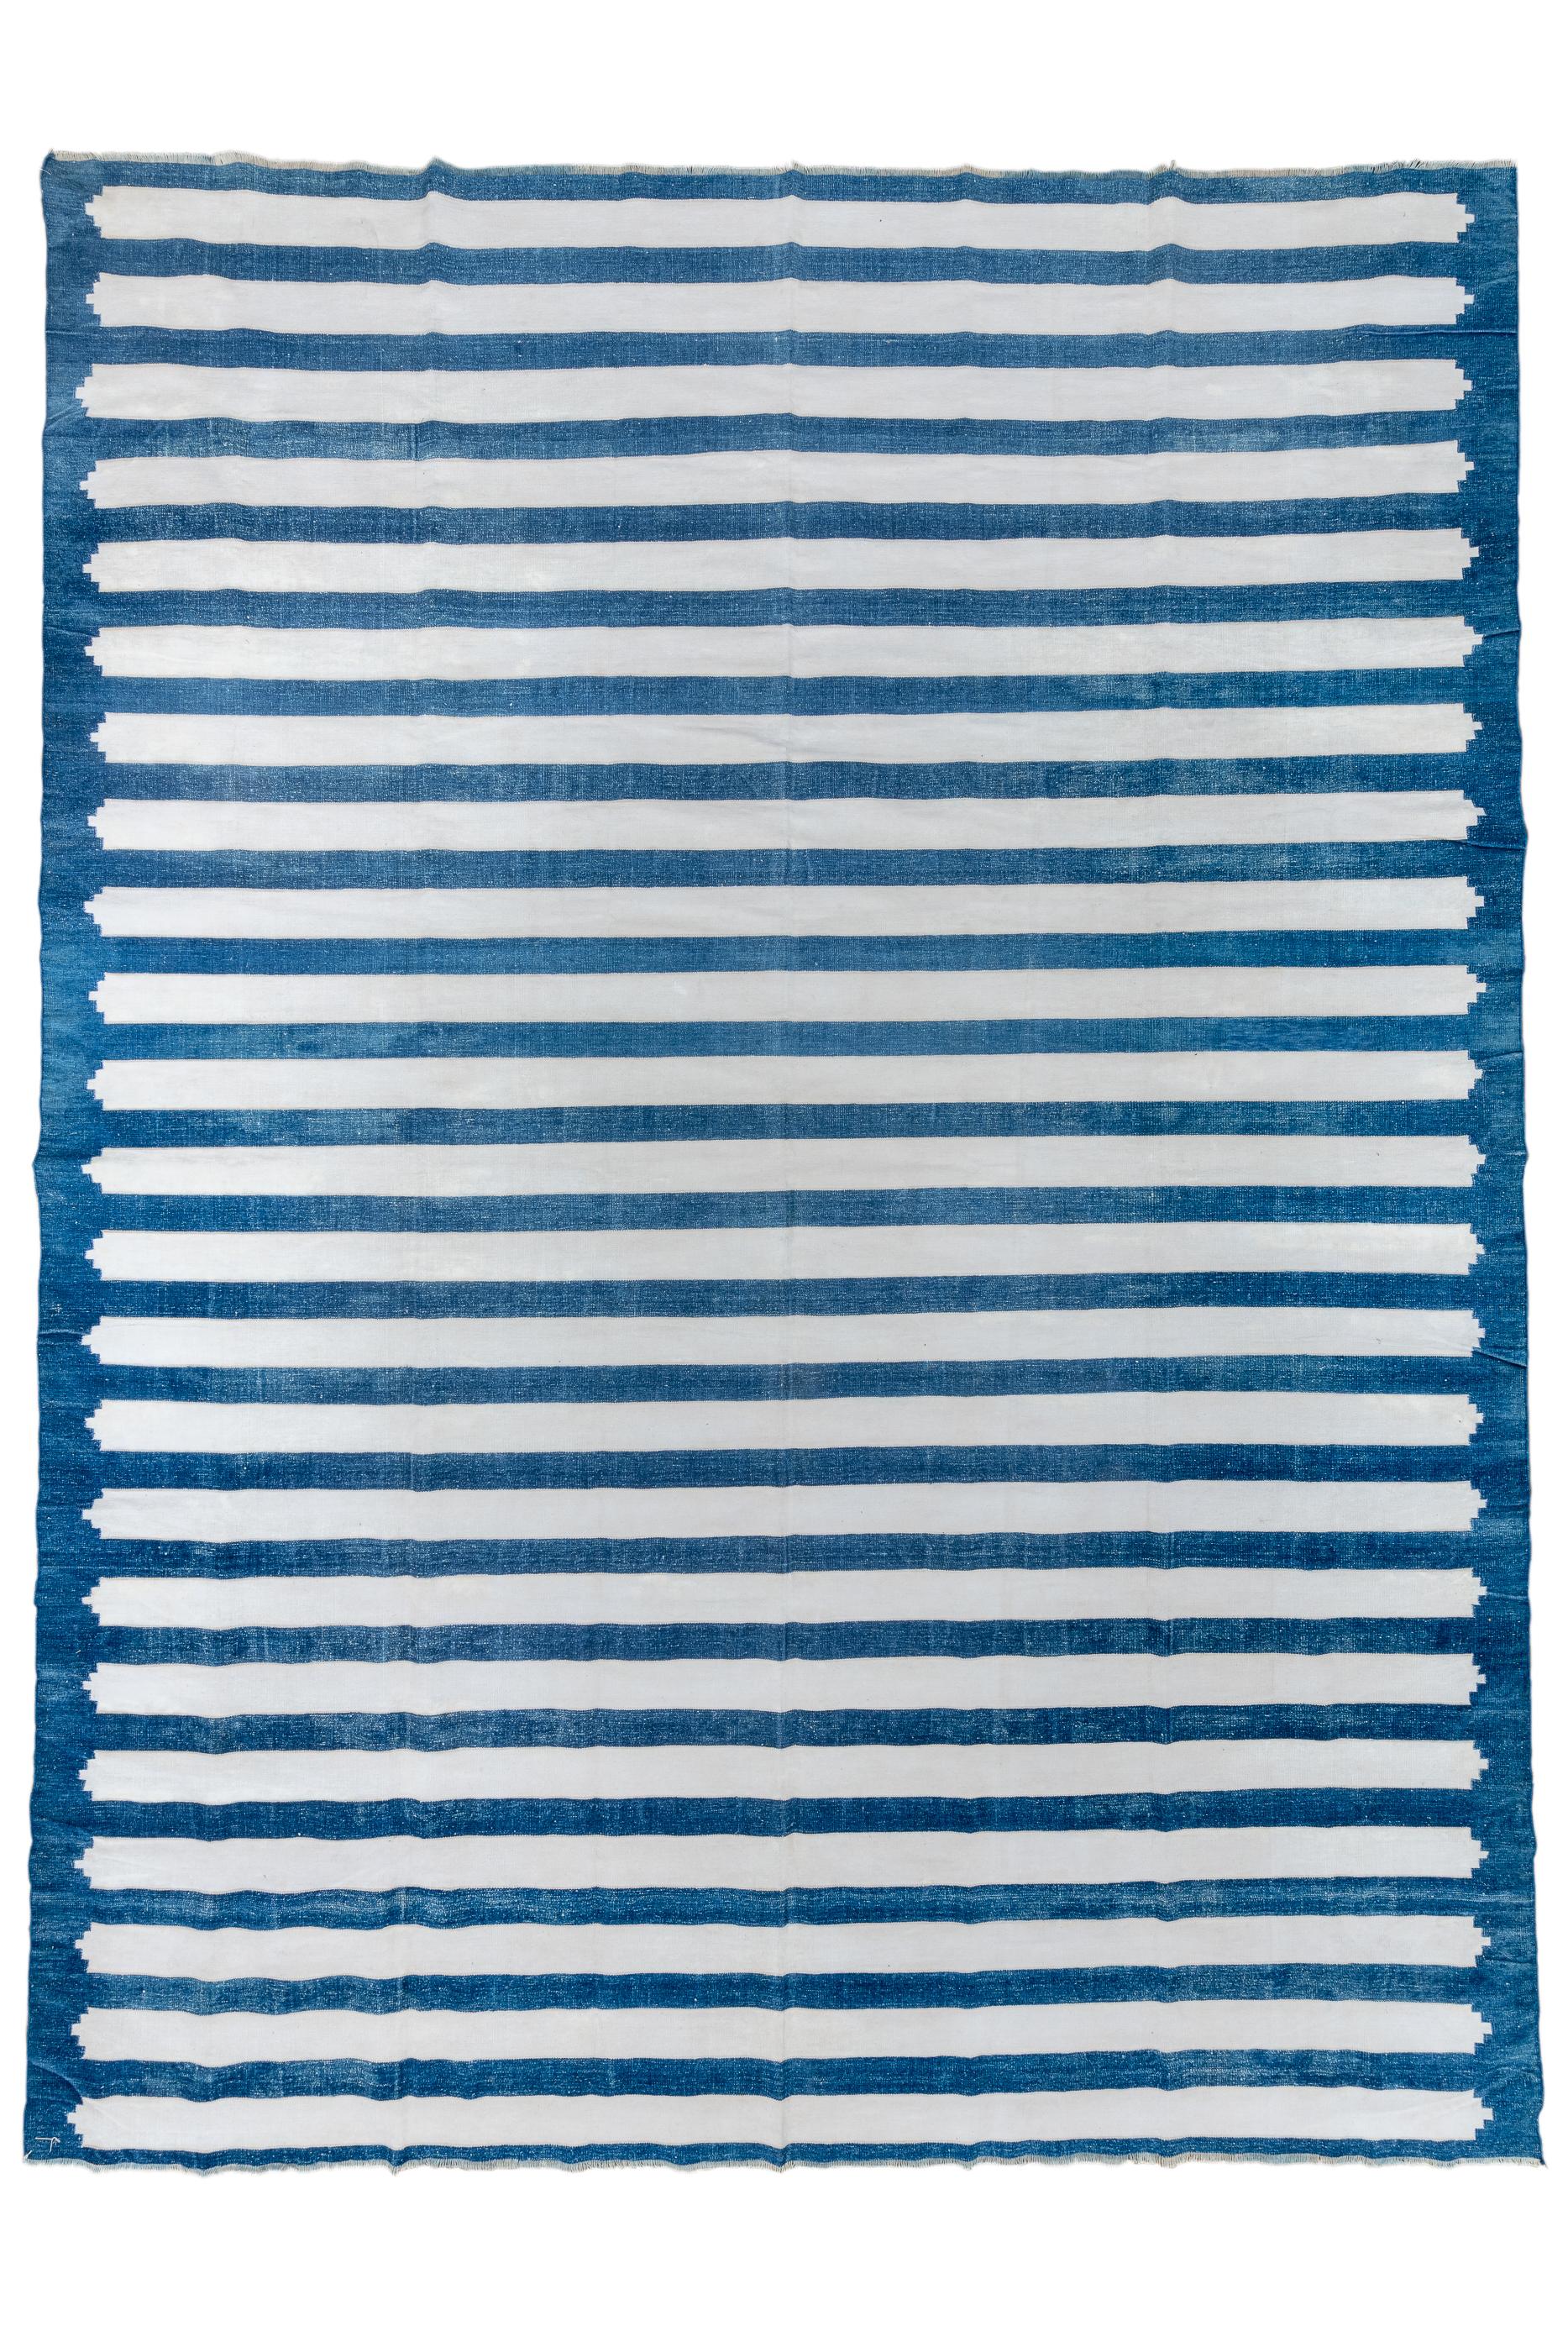 Classical blue and white striped Indian hand-woven Dhurrie rug.
Antique all cotton flatweave carpet in excellent condition.
Rug Measures
10'6x14